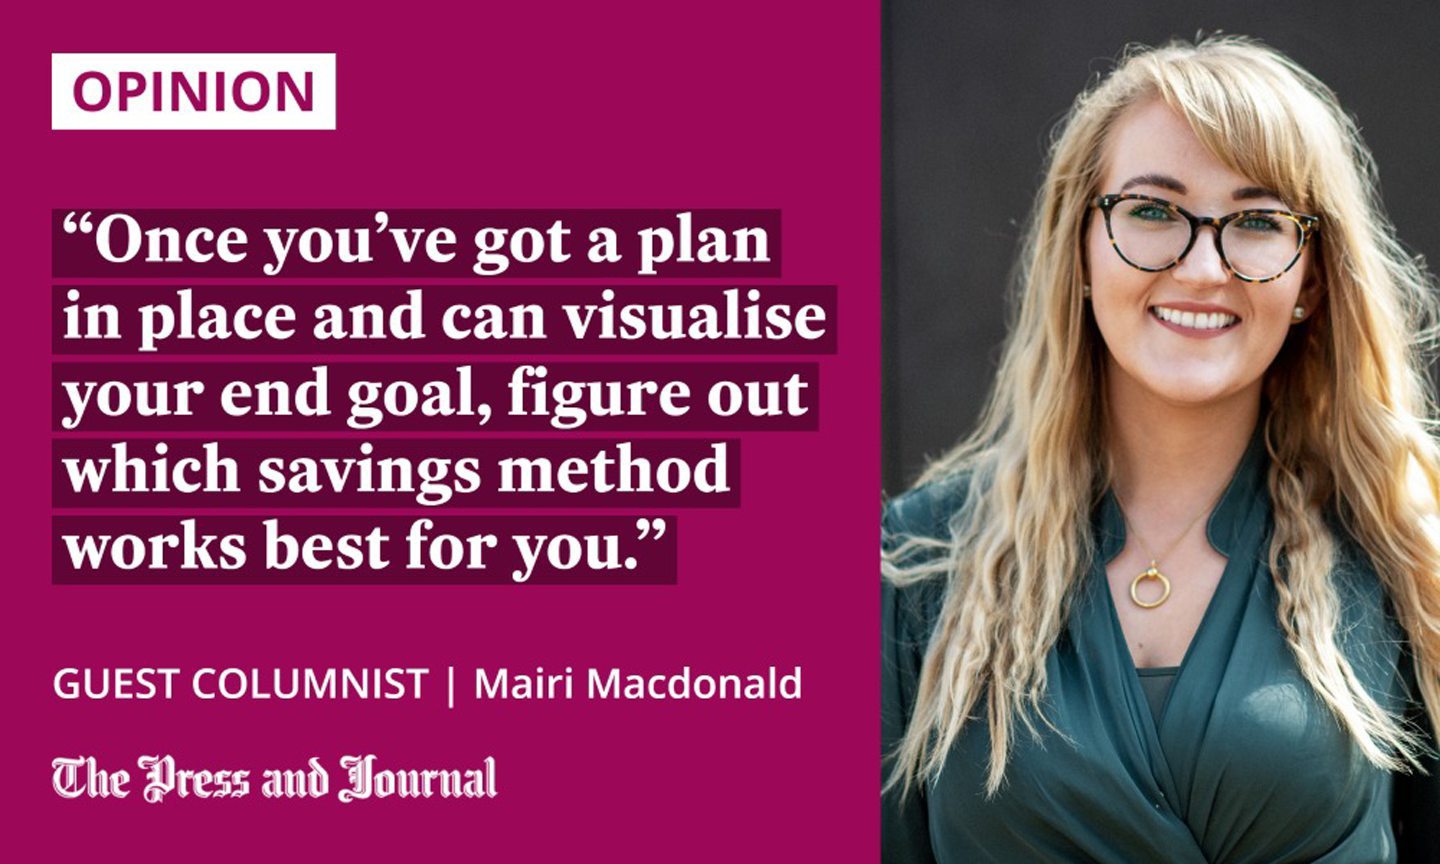 Guest columnist, Mairi Macdonald on spending money: "Once you’ve got a plan in place and can visualise your end goal, figure out which savings method works best for you."